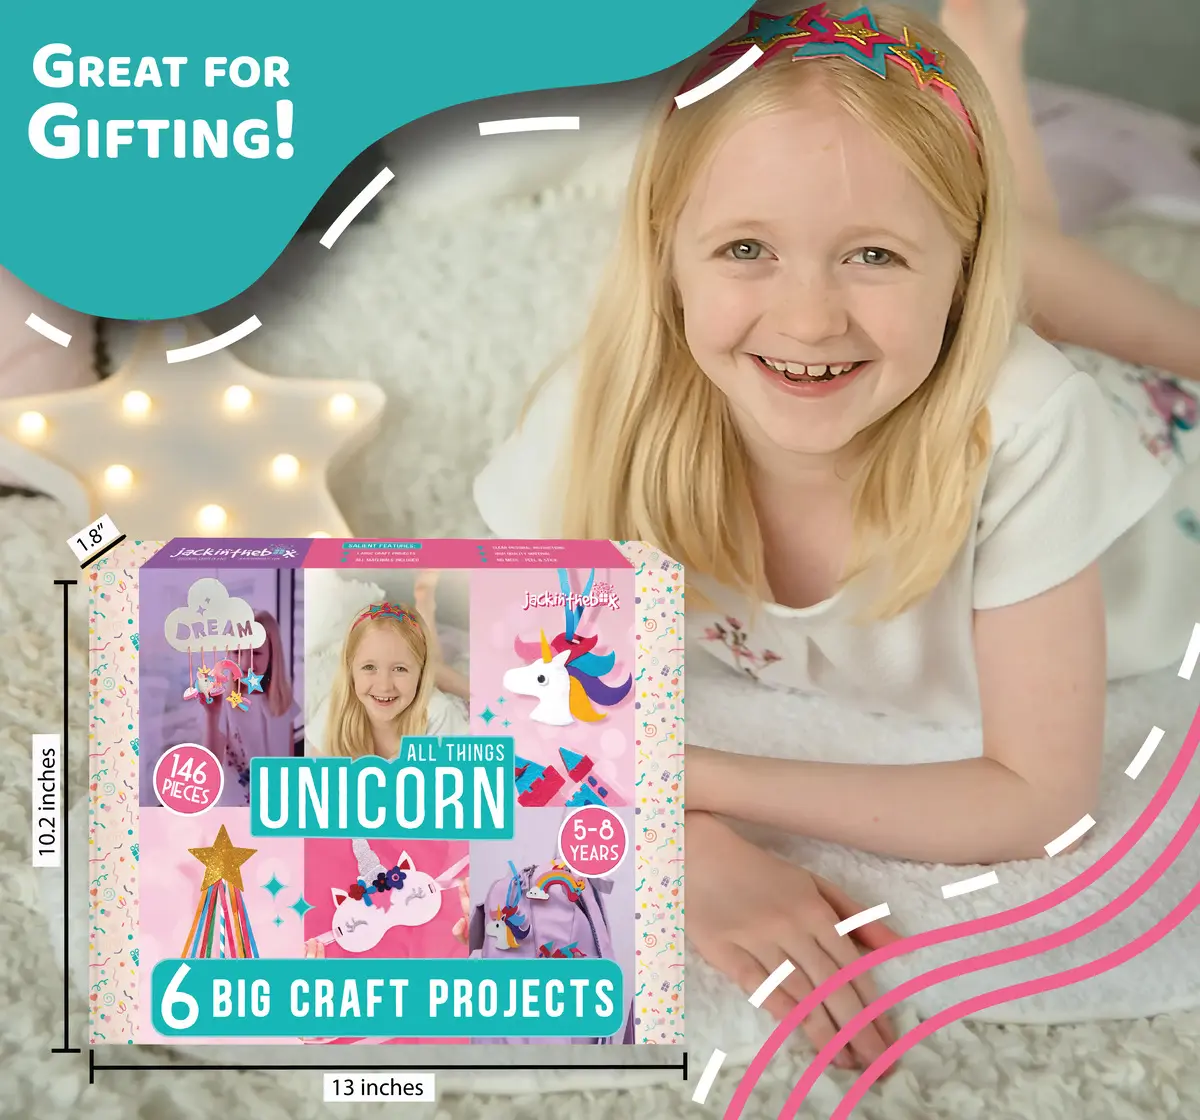 Jack In The Box Unicorn Crafts 8-in-1 Craft Kit For Girls Ages 5Y+, Multicolour